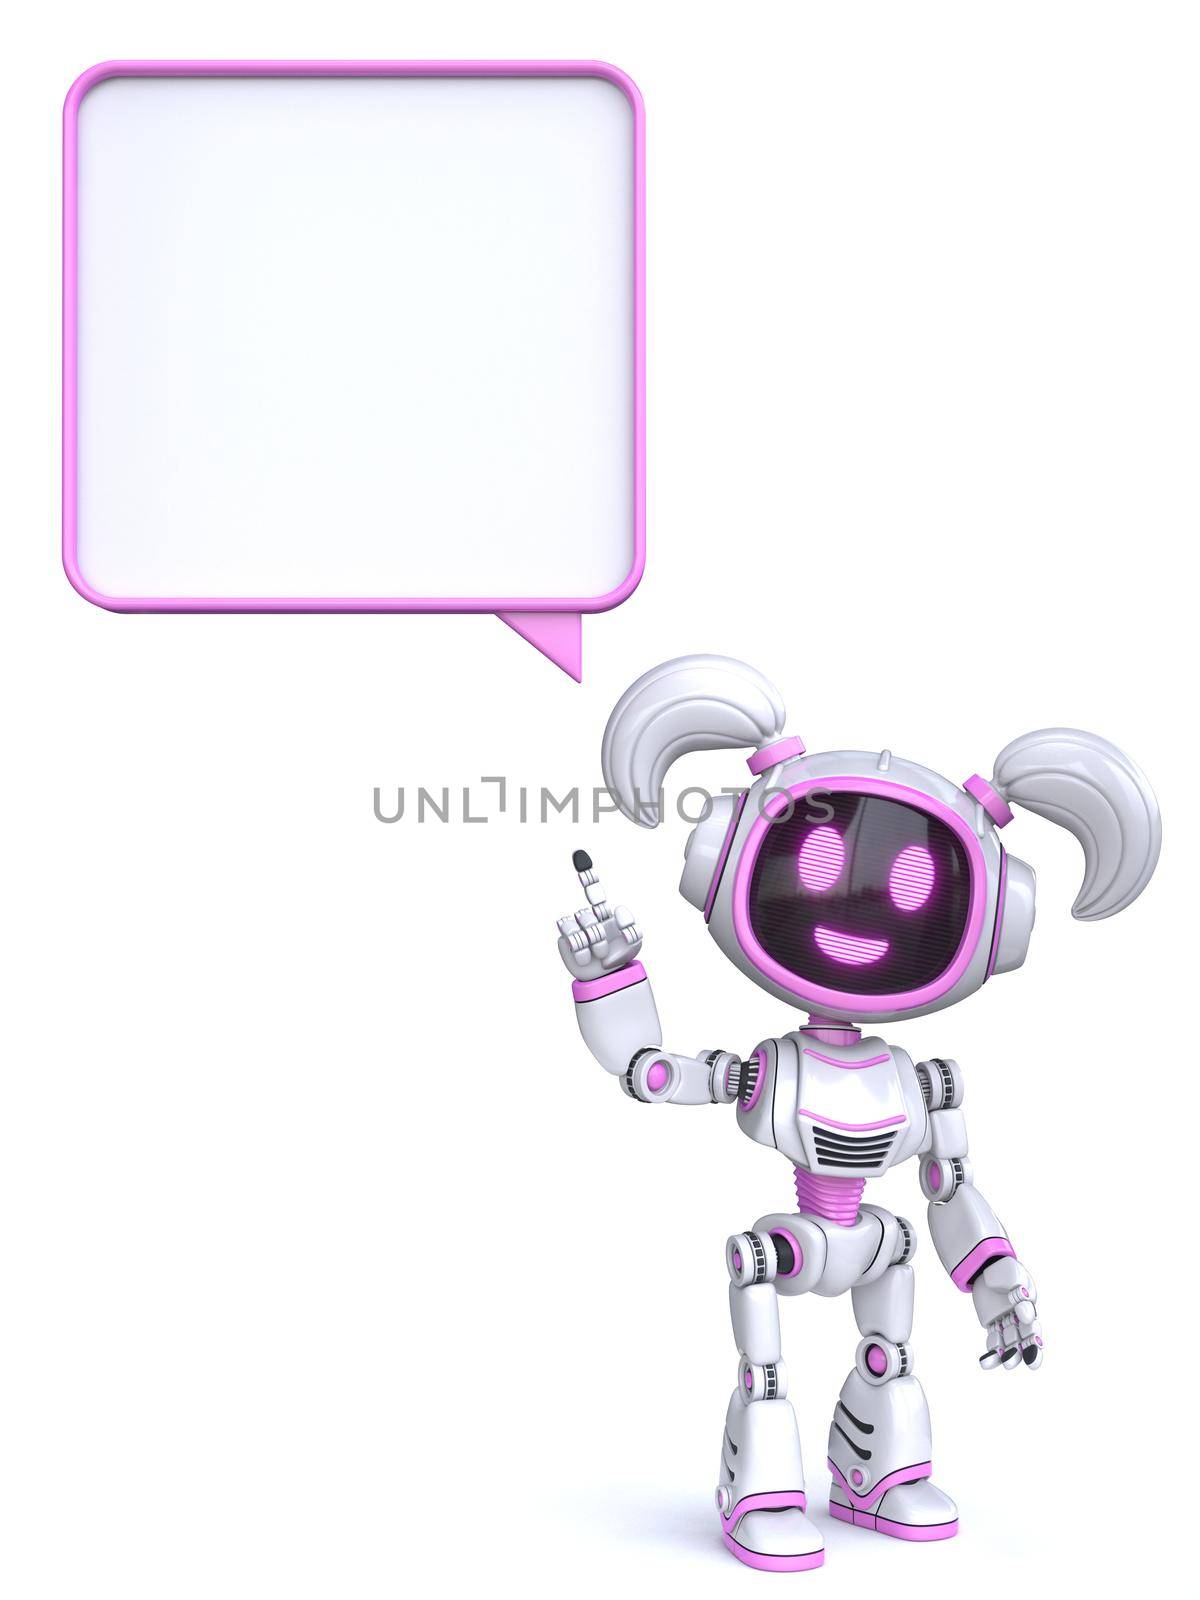 Cute pink girl robot with blank comic bubble 3D rendering illustration isolated on white background